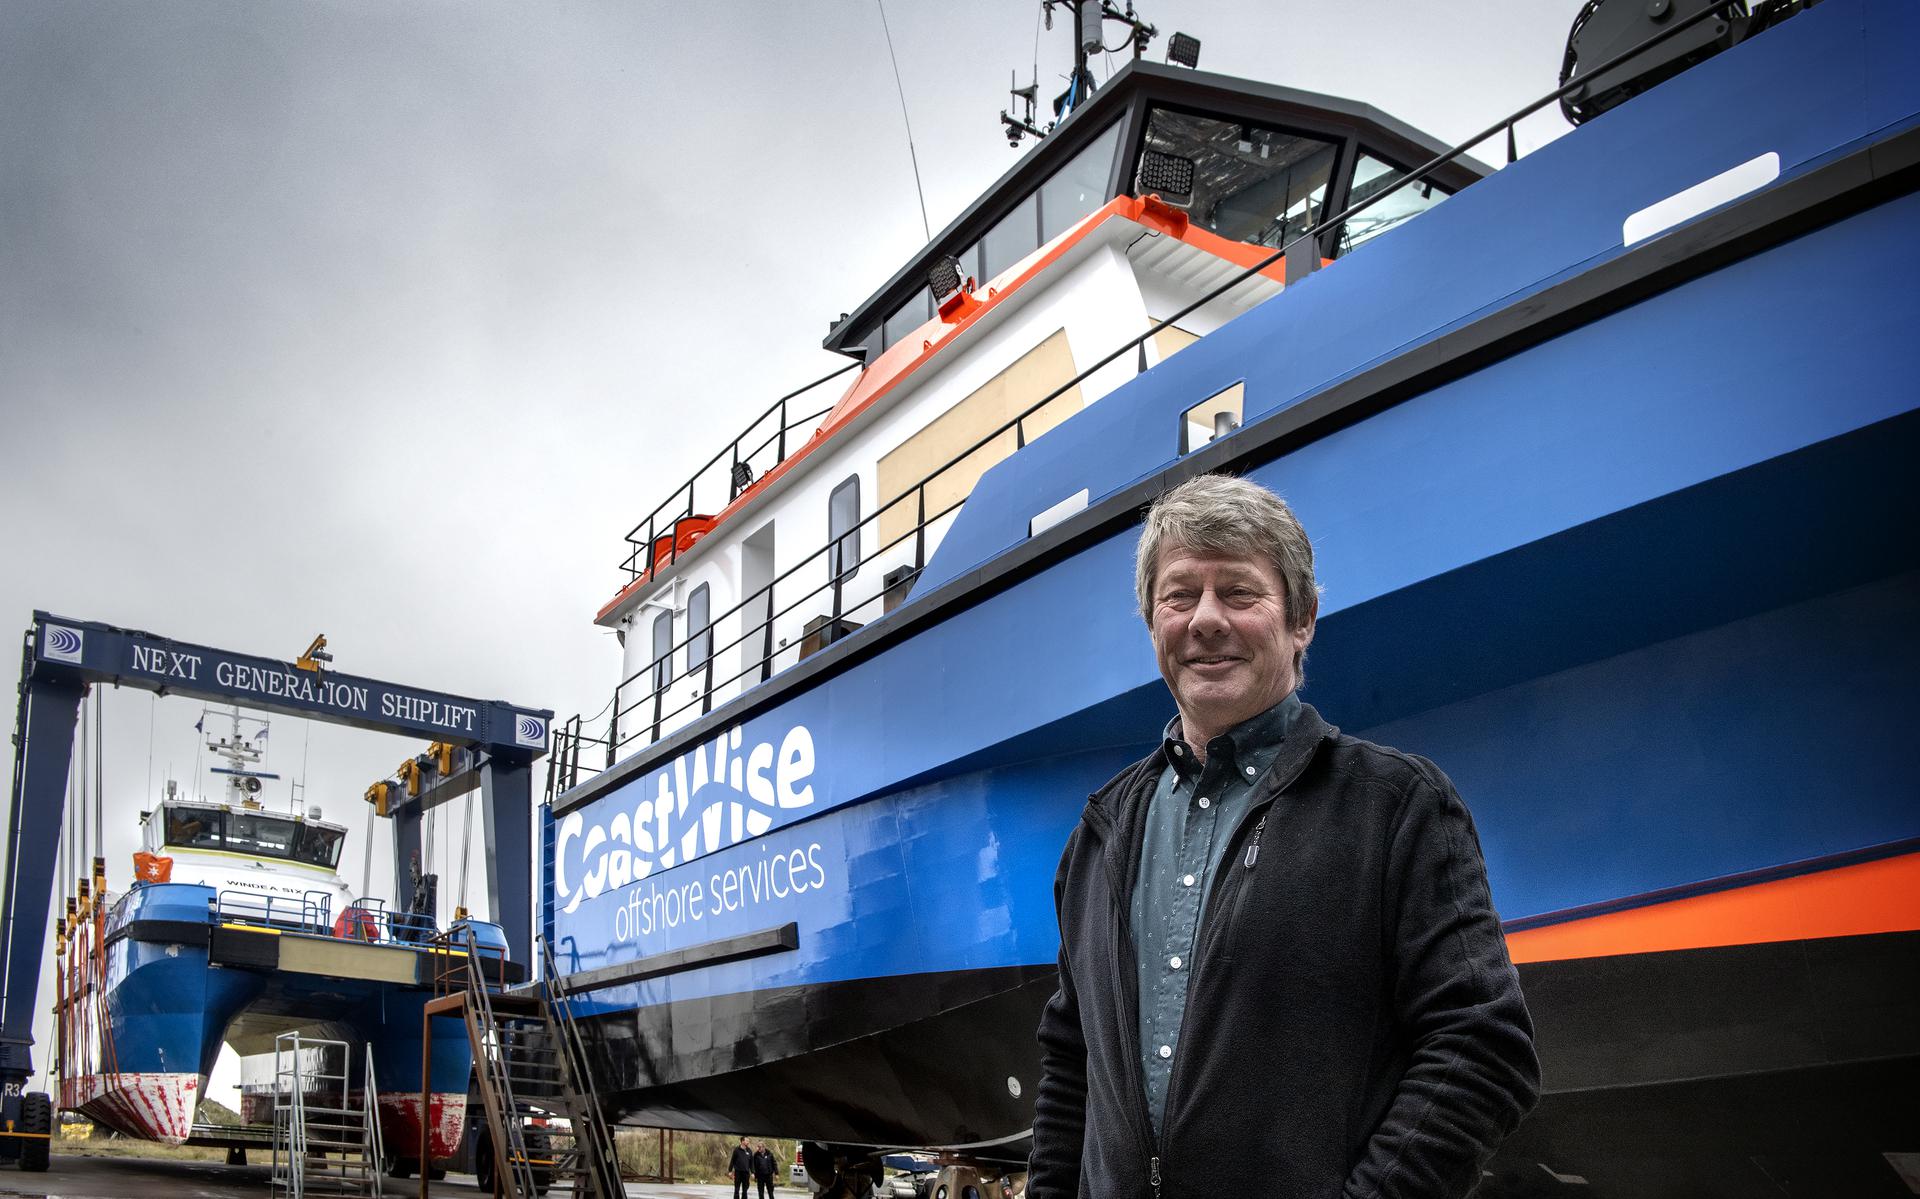 Lauwersoog’s Next Generation shipyard is building a ‘self-correcting’ experimental boat for England.  “We are very proud”